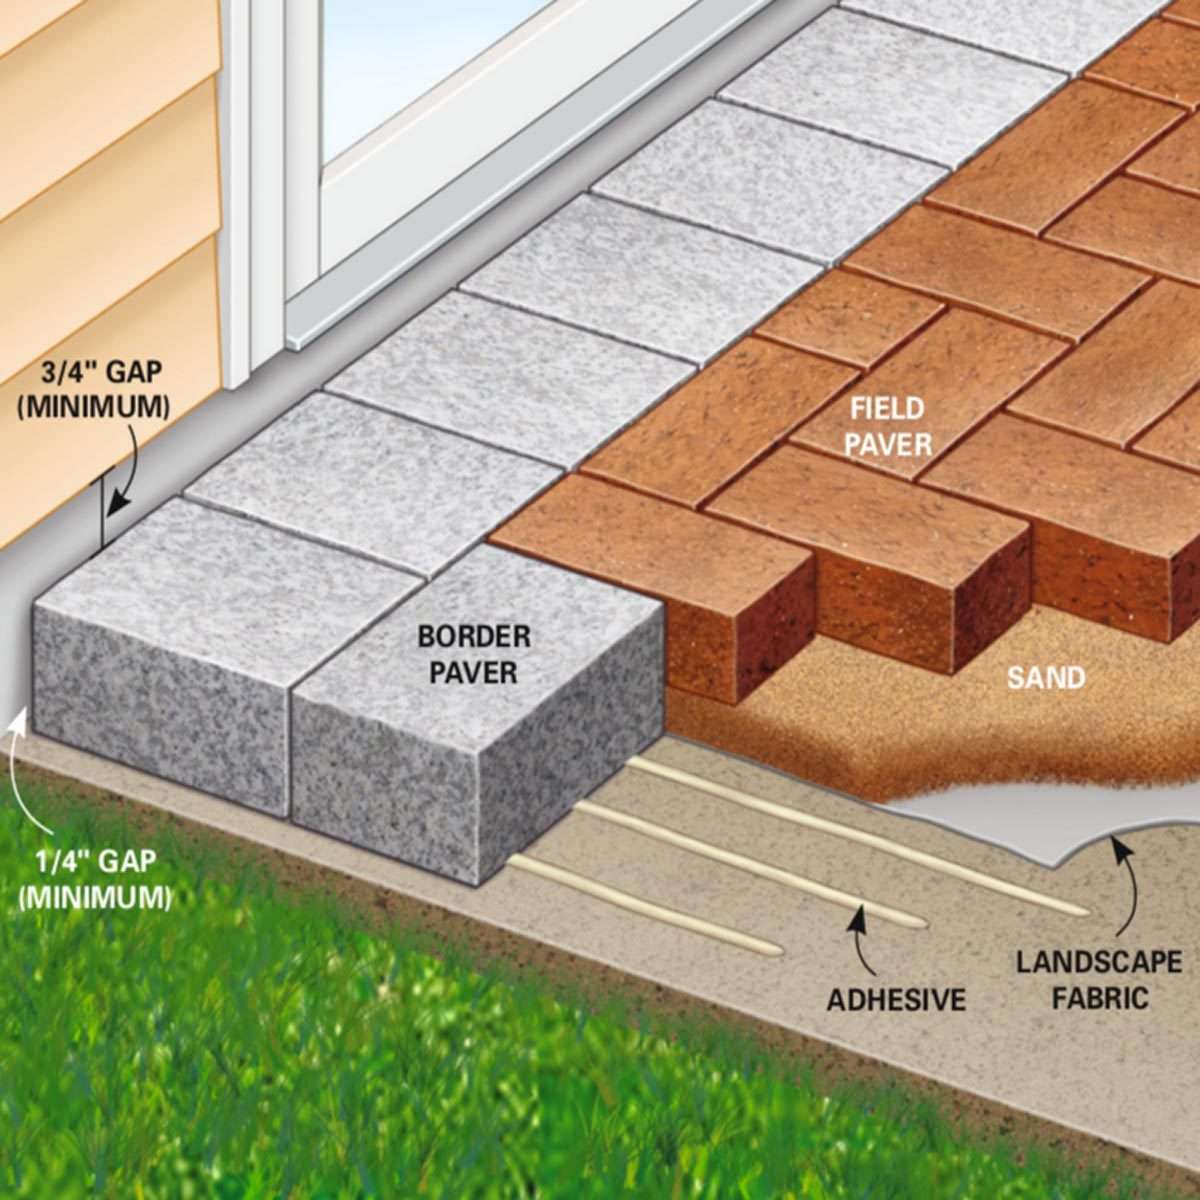 How to Cover a Concrete Patio With Pavers (DIY)